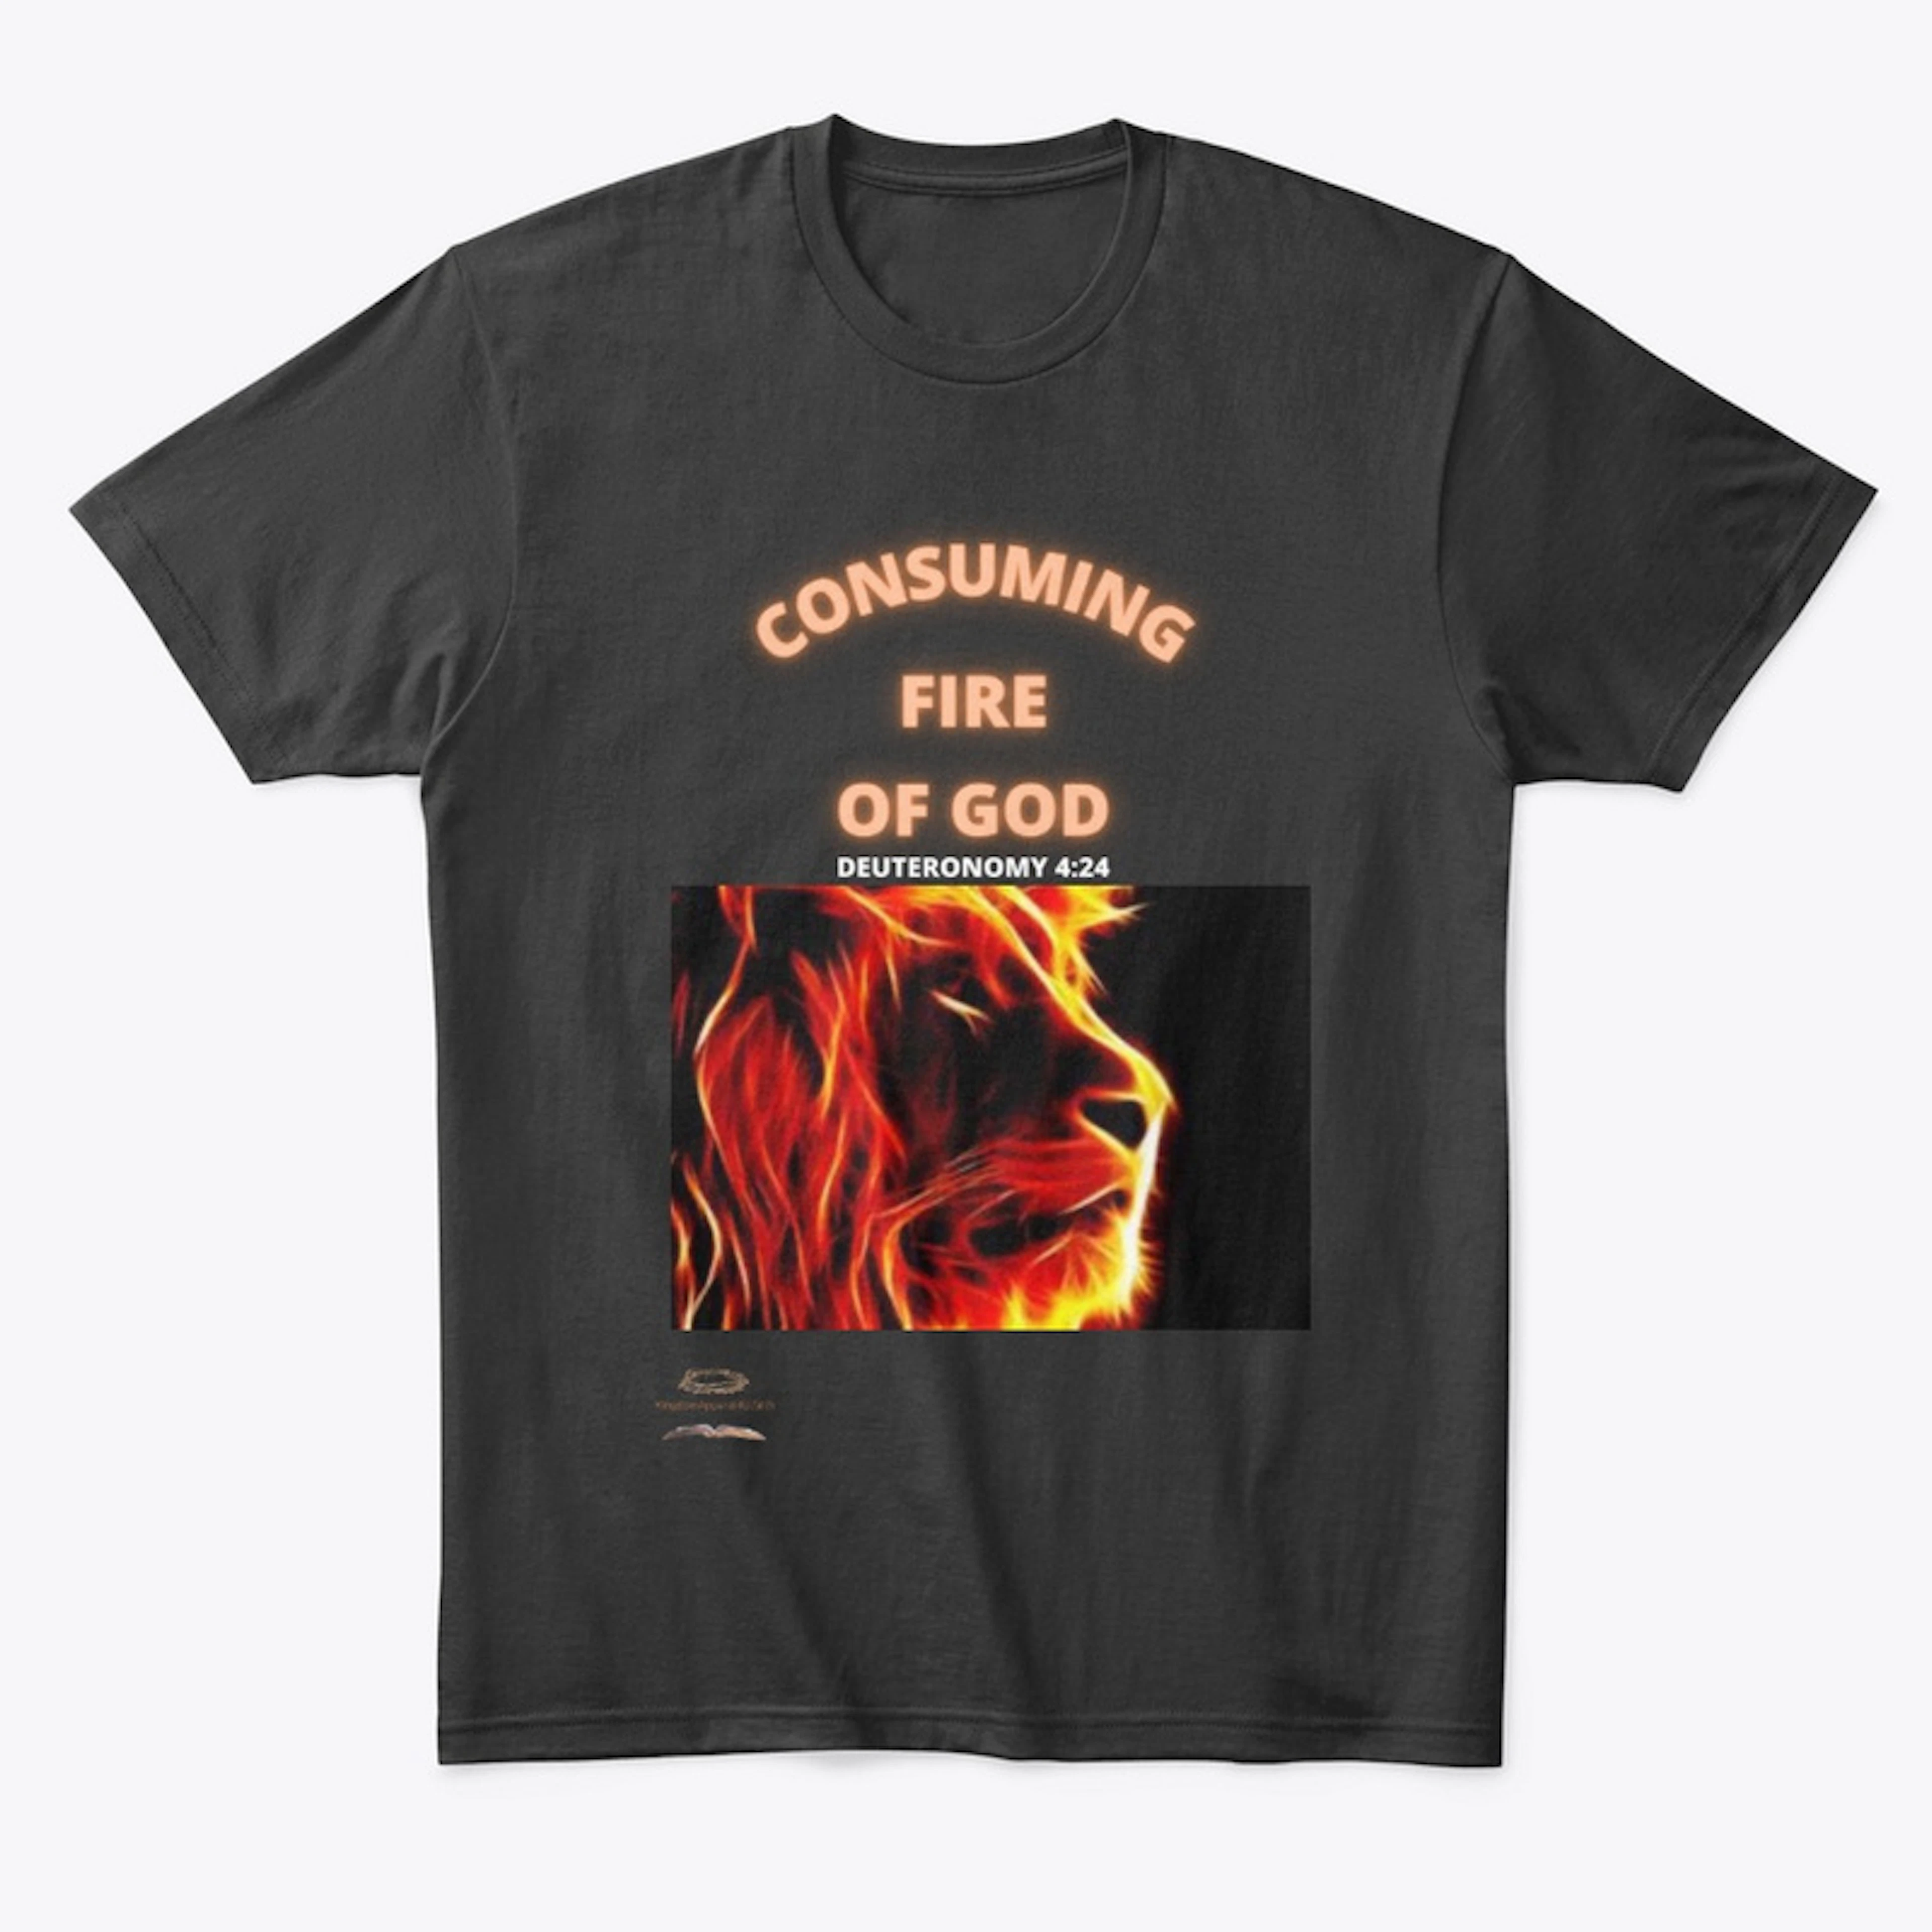 CONSUMING FIRE